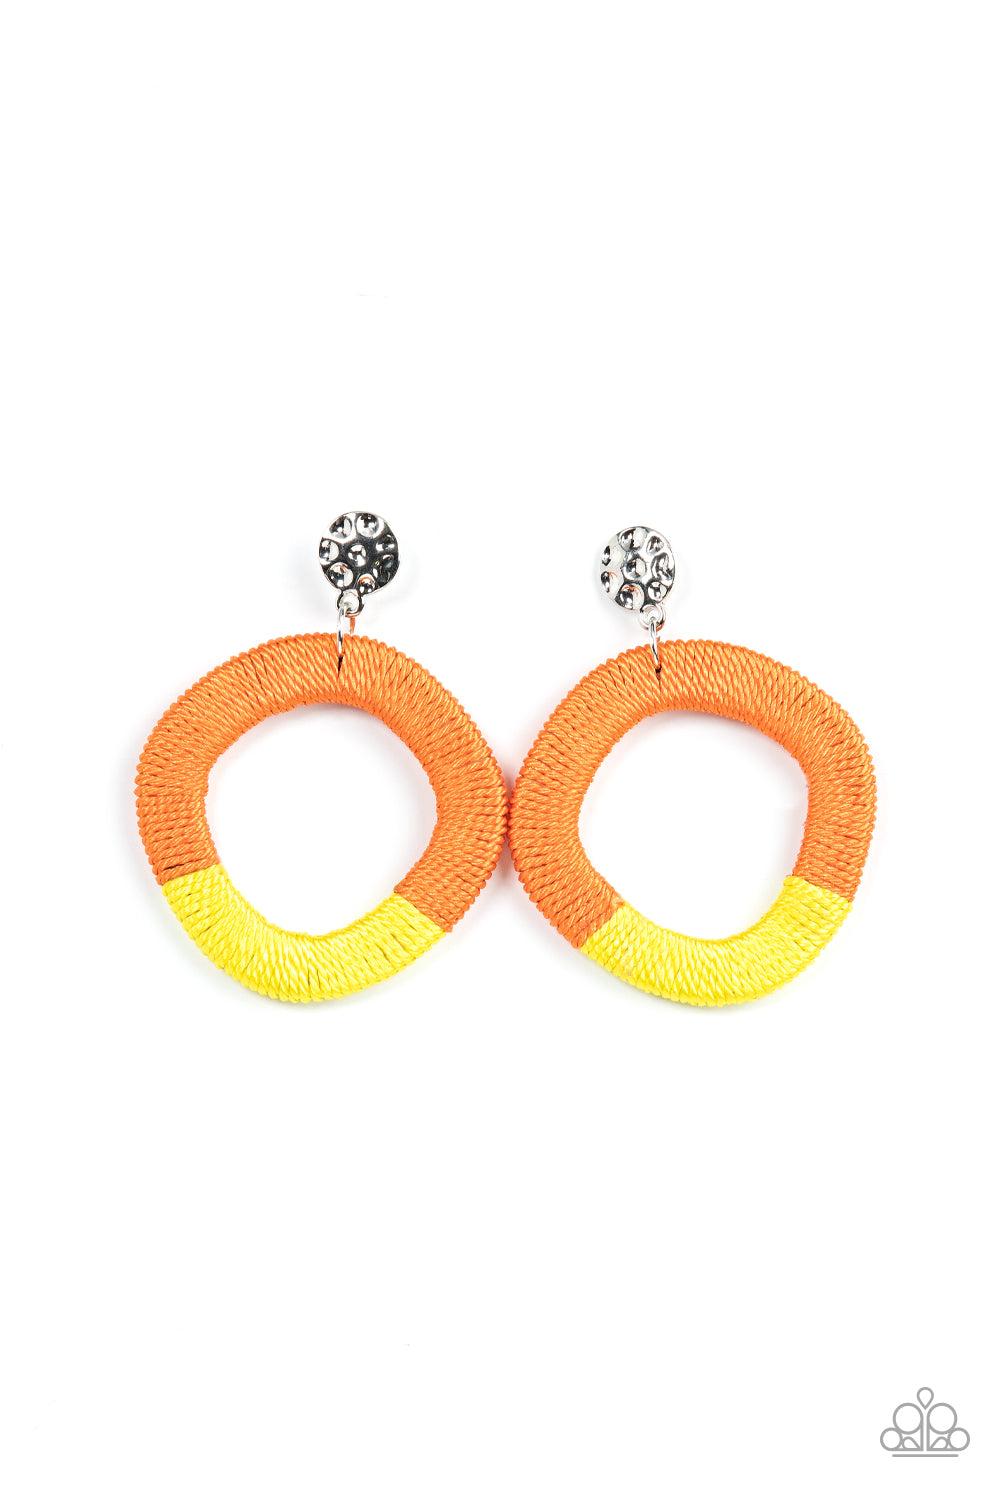 Thats a WRAPAROUND Multi Post Earring - Paparazzi Accessories  A hammered silver disc gives way to a wooden frame decoratively wrapped in shiny orange and yellow threaded accents, creating a colorful lure. Earring attaches to a standard post fitting.  Sold as one pair of post earrings.